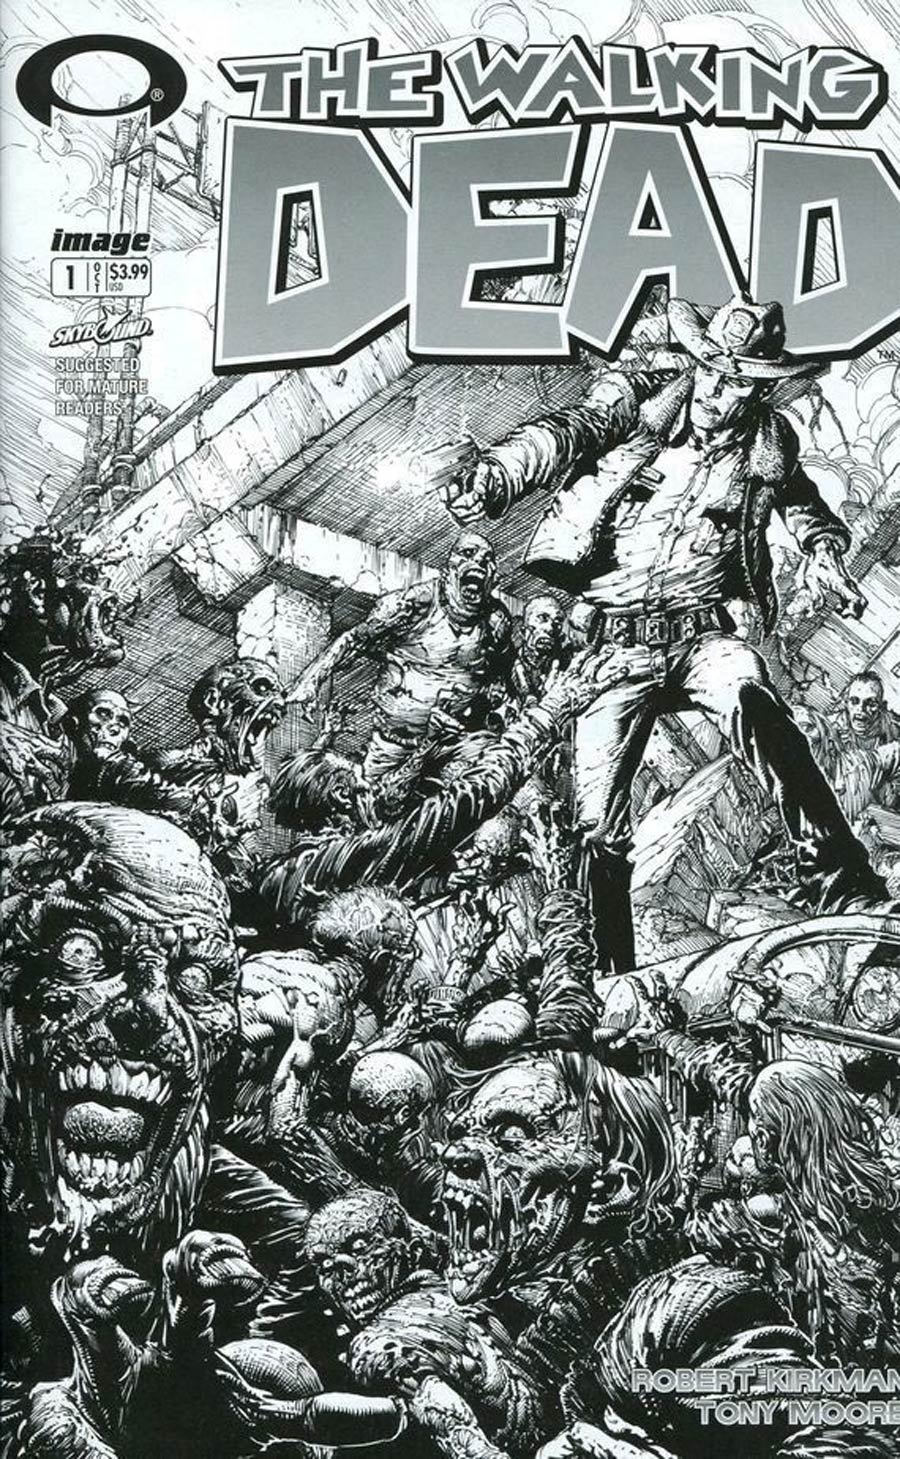 WALKING DEAD #1 BLACK BAGGED 15th ANNIVERSARY SEALED DAVID FINCH COVER INSIDE 